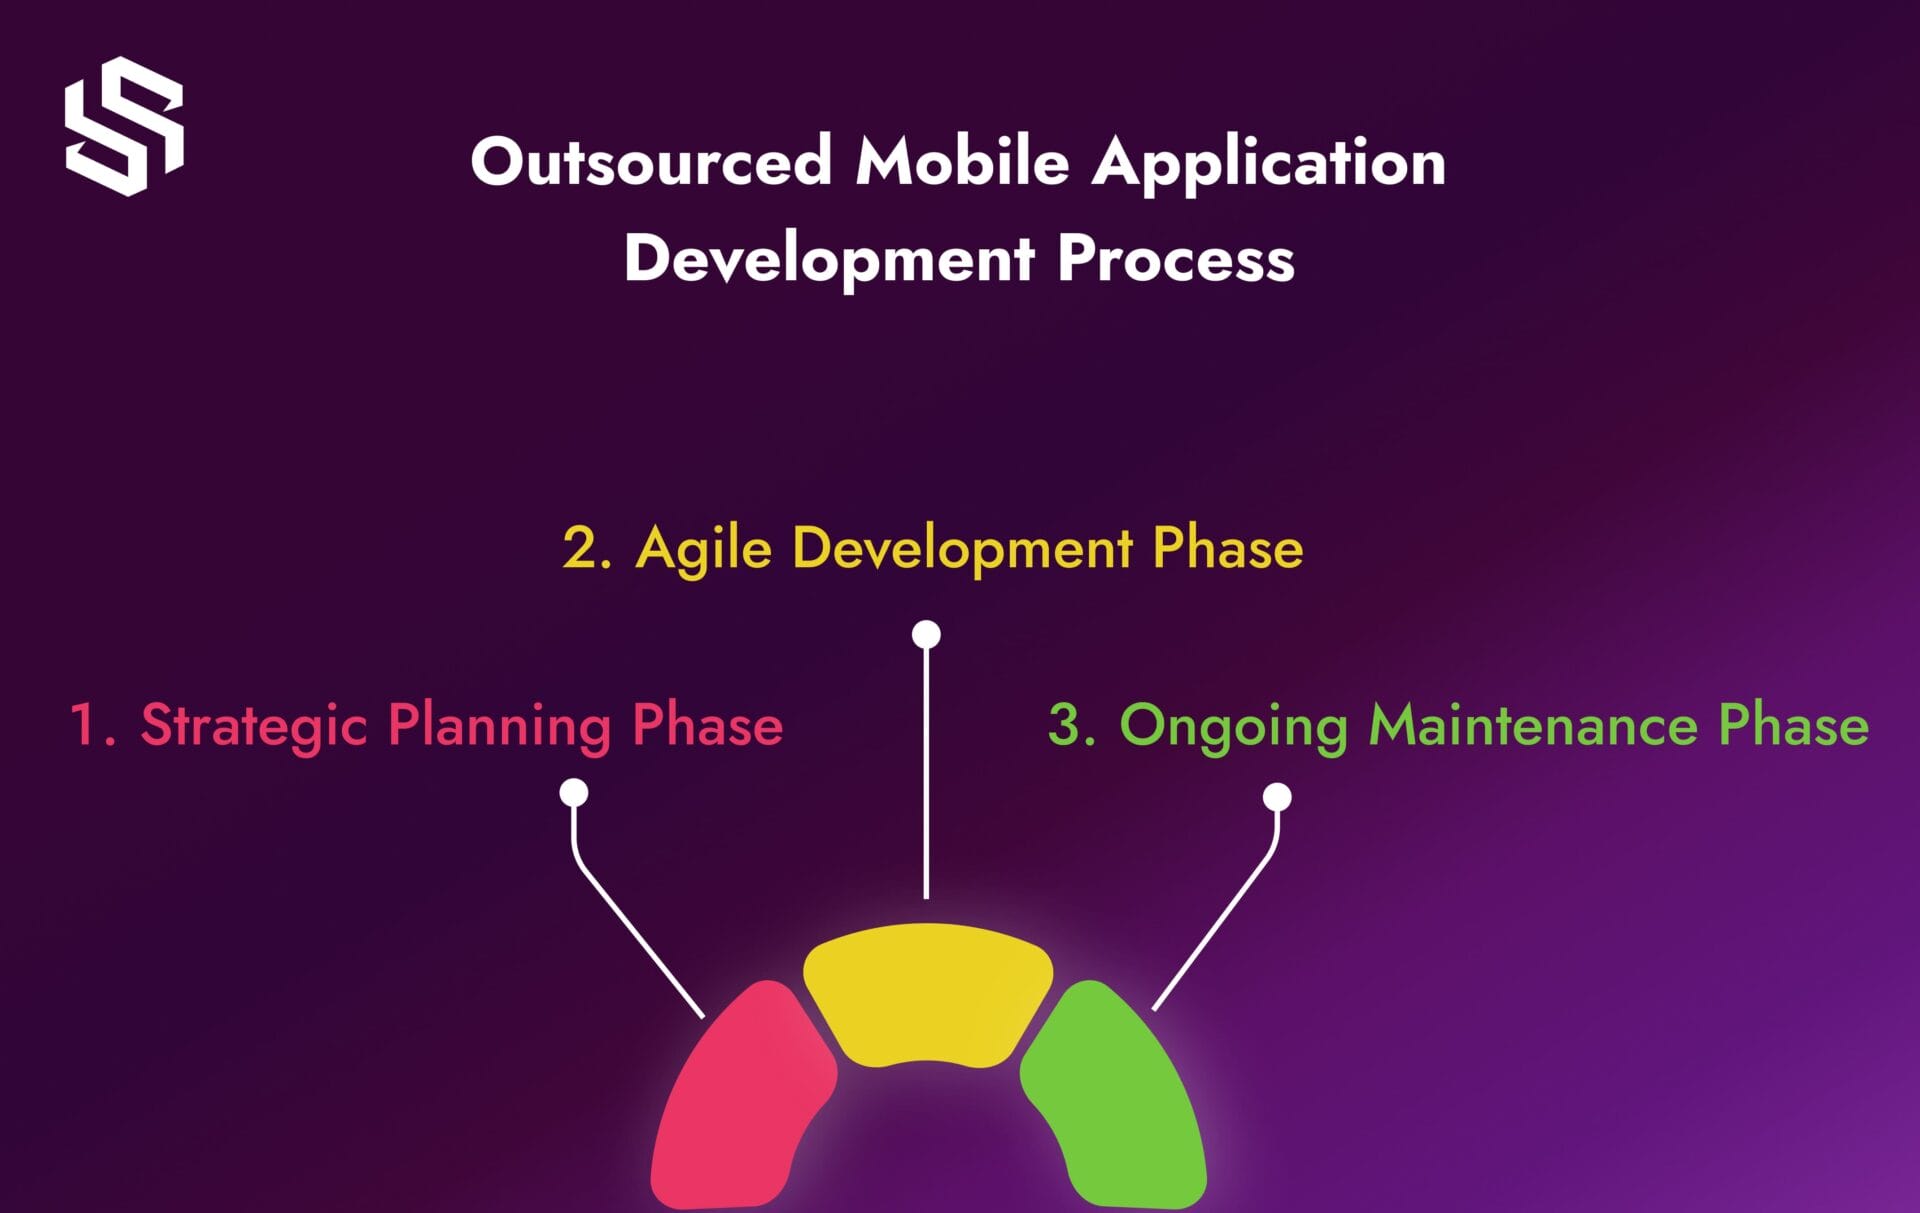 Process of Outsourced Mobile Application Development